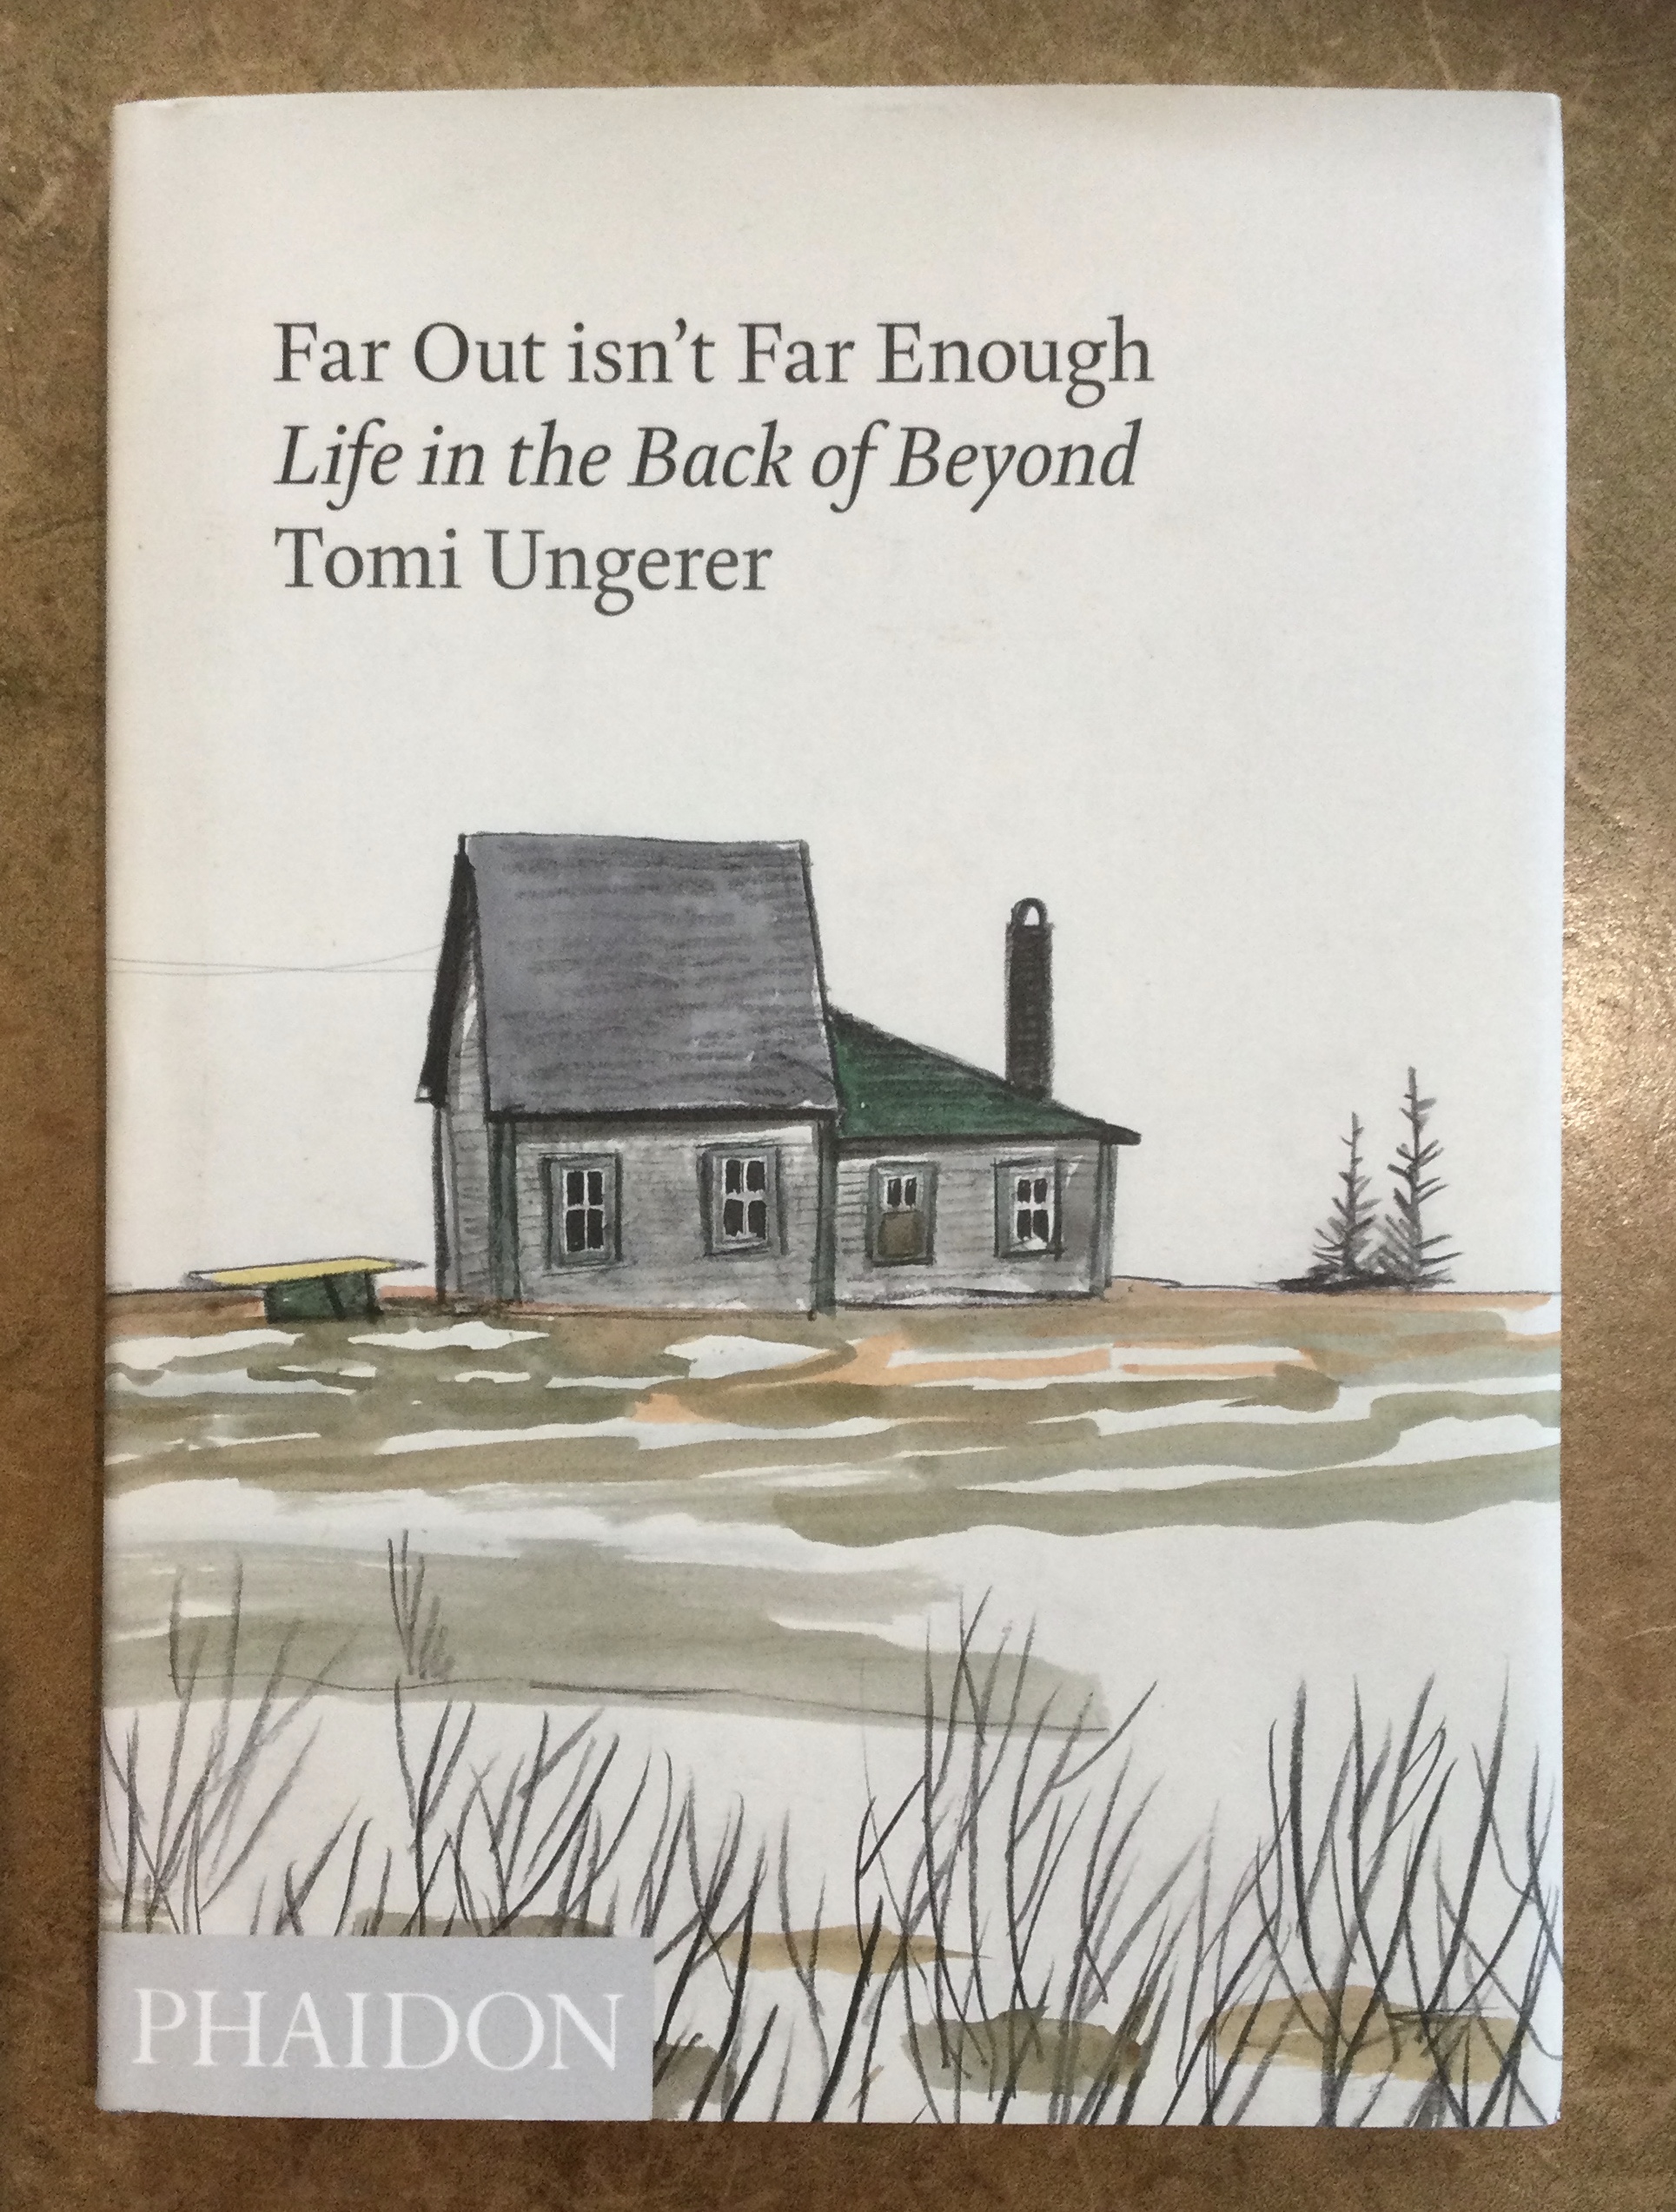 Far Out isn't Far Enough: Life in the Back of Beyond - Tomi Ungerer